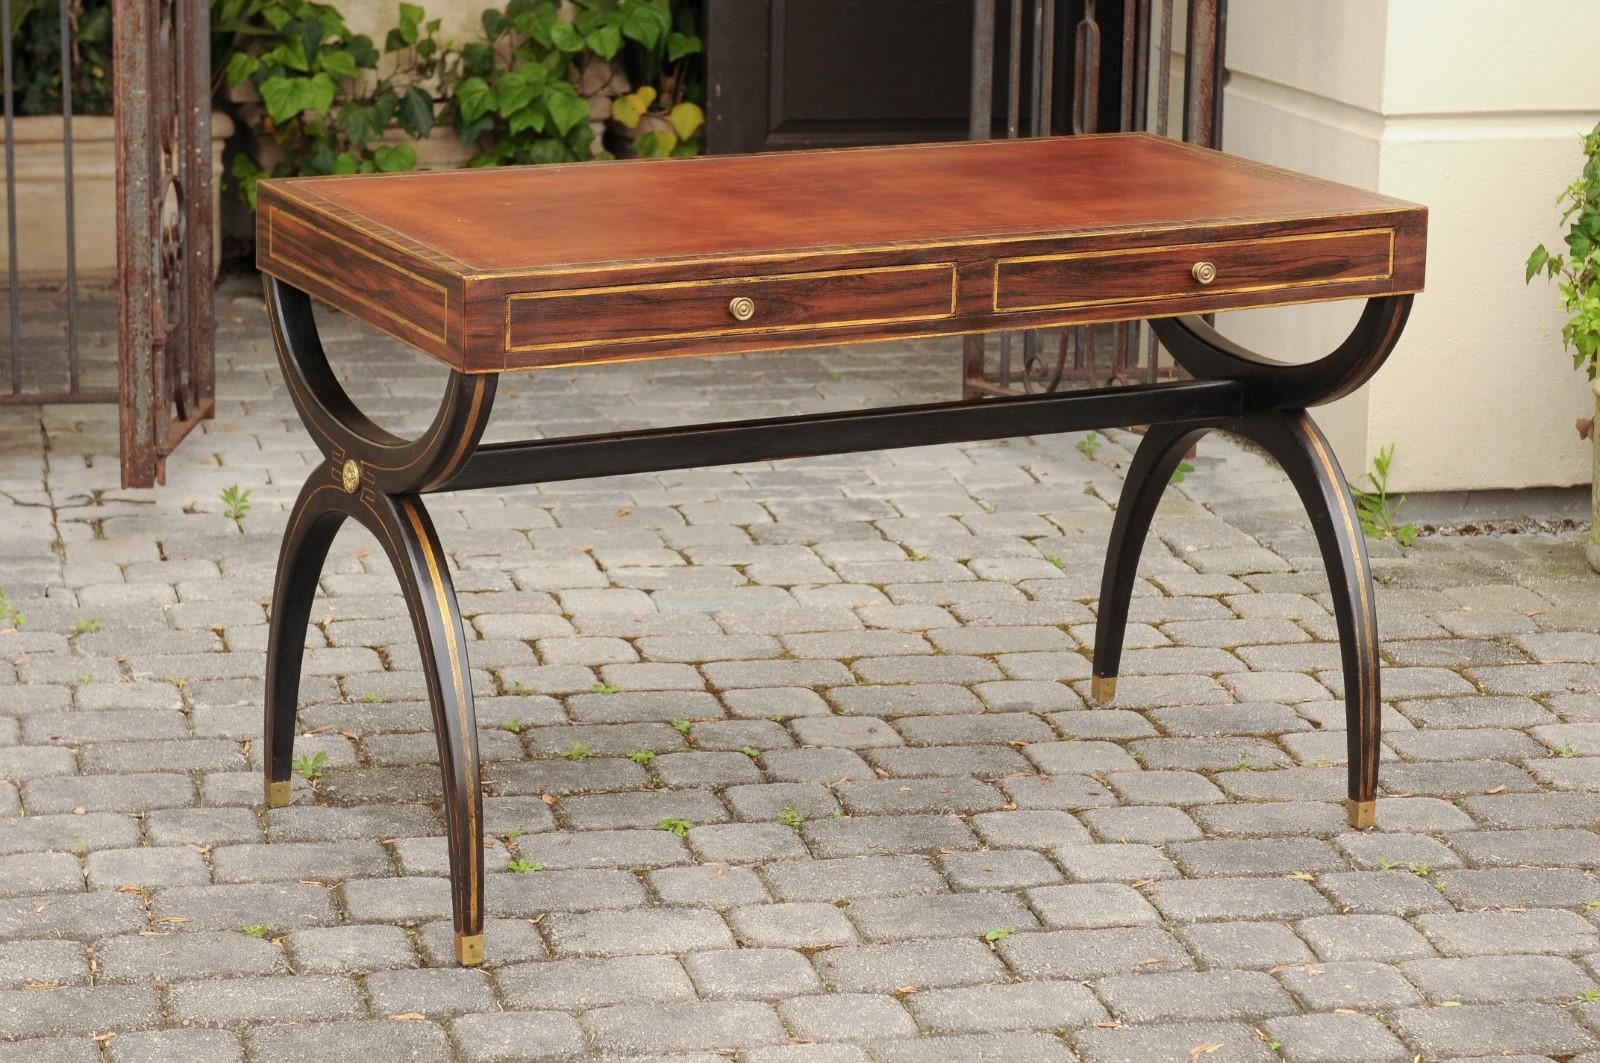 An English Regency style leather top desk from the mid-20th century, with black X-form base, gilded accents and two drawers. Born in England during the mid-century period, this exquisite desk presents the stylistic characteristics of the Regency